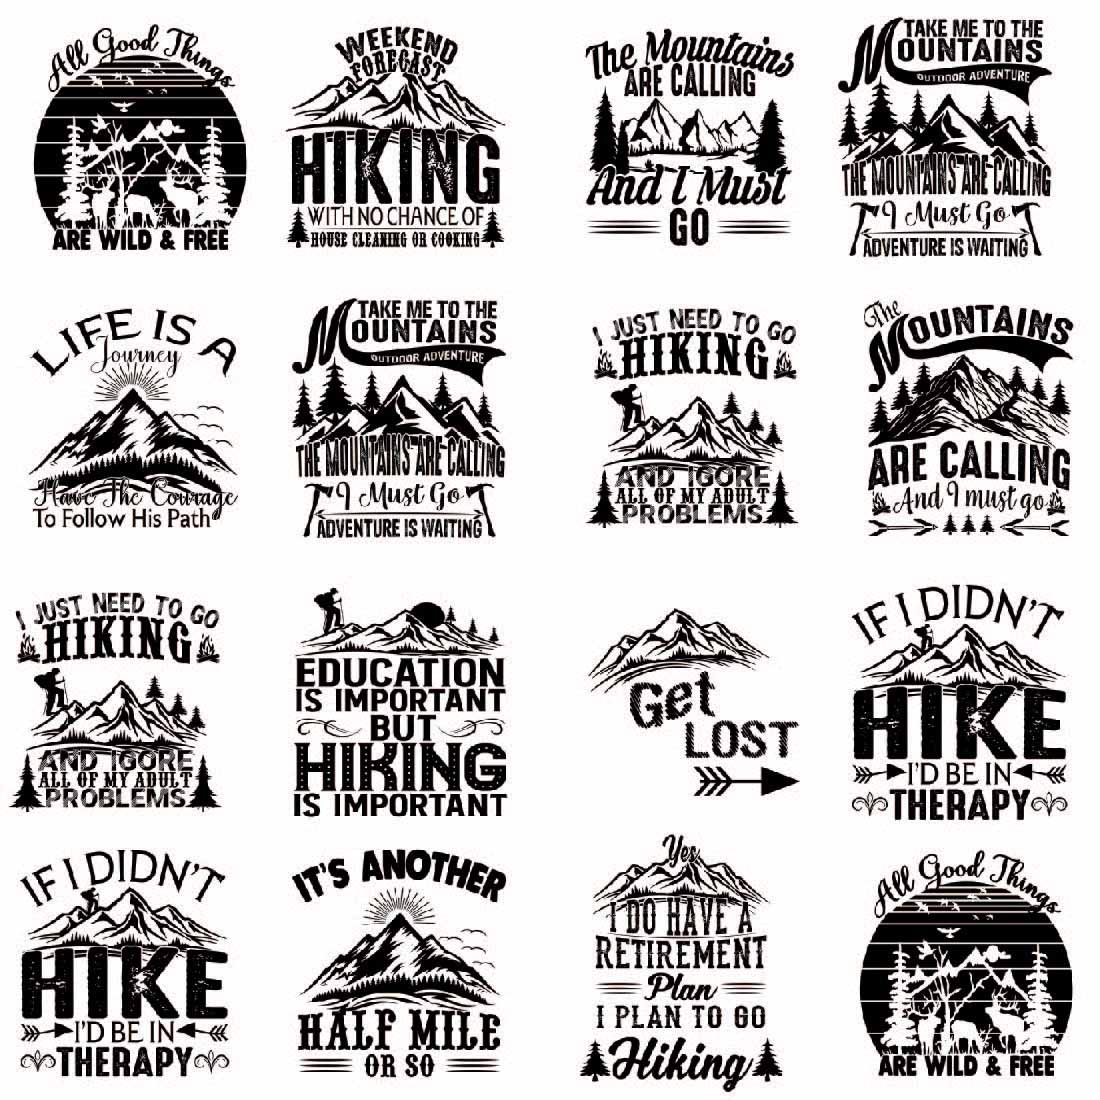 Hiking Saying & quotes, SVG T-Shirt Design |The Mountains are calling and I must go, Retro It's All About Jesus Typography Tshirt Design | Ai, Svg, Eps, Dxf, Jpeg, Png, Instant download T-Shirt | 100% print-ready Digital vector file cover image.